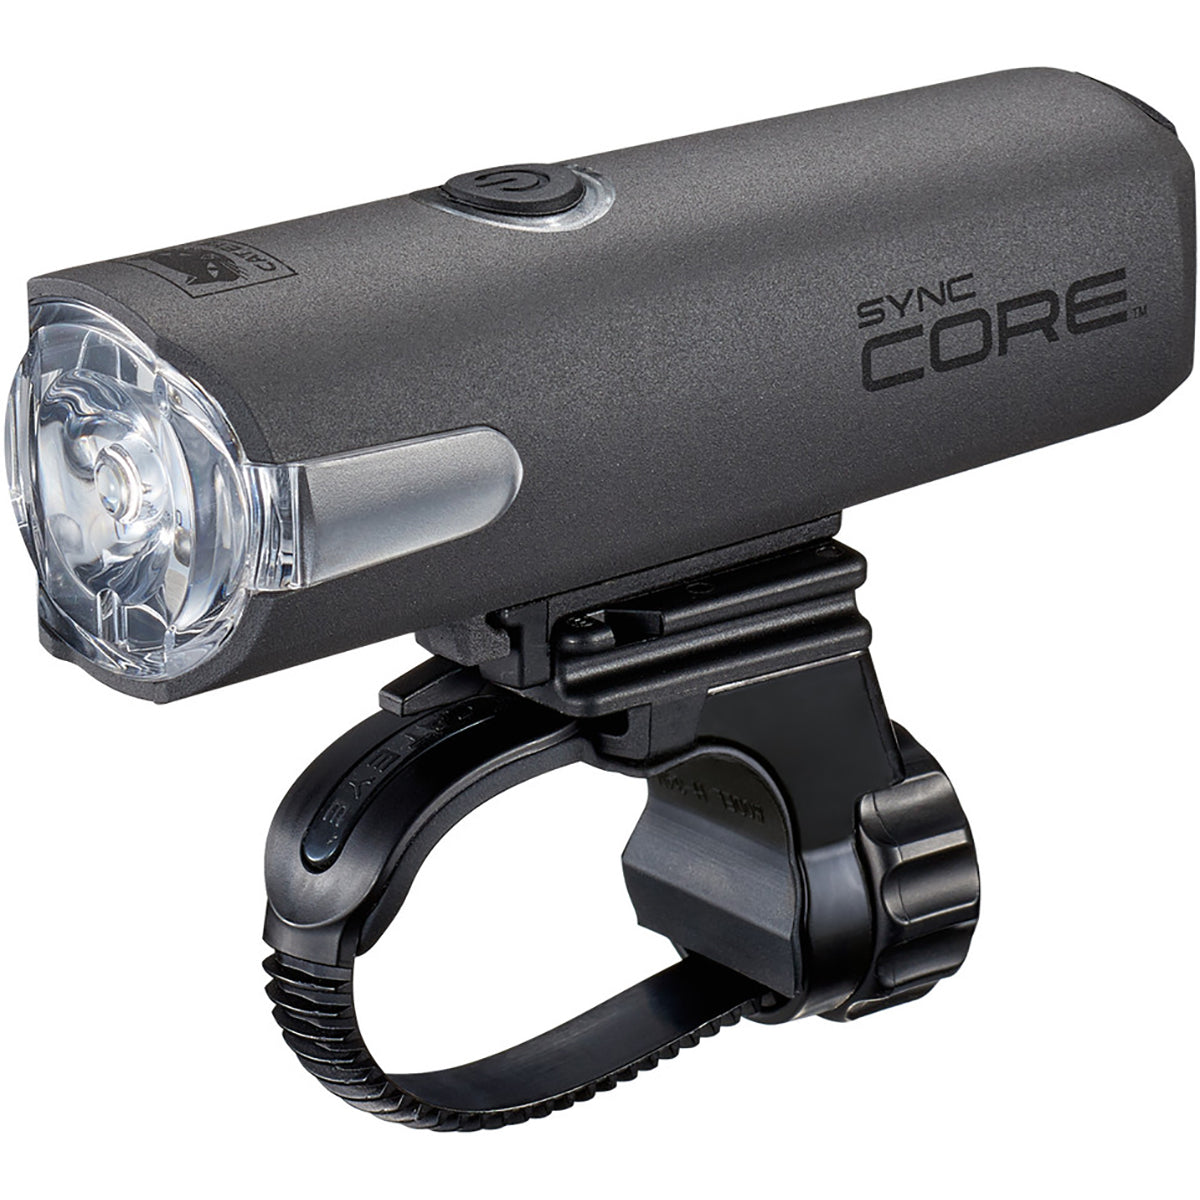 CatEye Sync Core Bicycle Light - HL-NW100RC CatEye